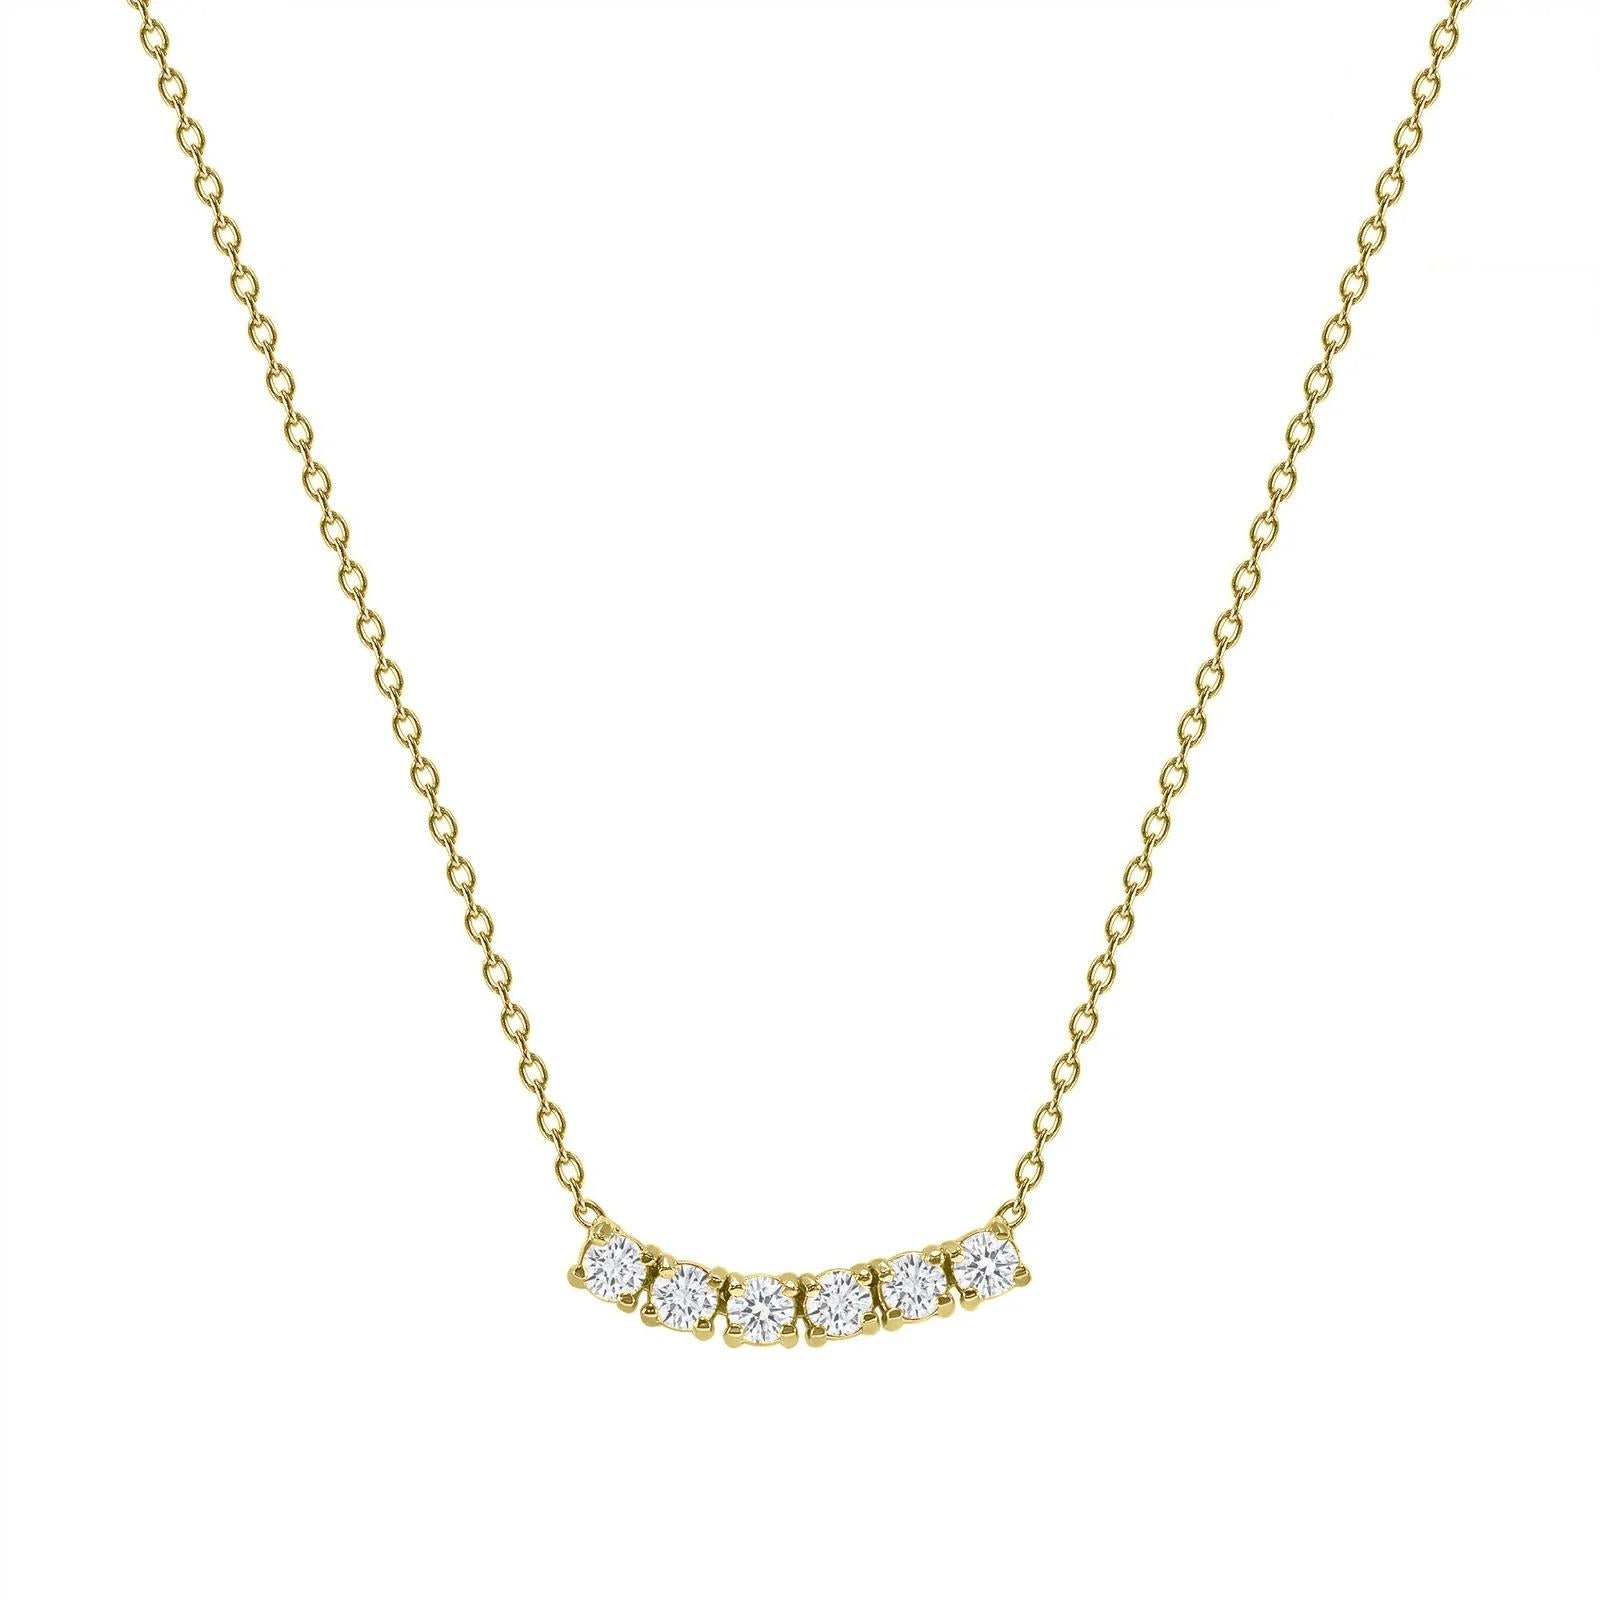 This petite, curved diamond necklace is crafted with gorgeous 14k gold set with six round diamonds.  

Gold: 14k 
Diamond Total Carats: 1 ct
Diamond Cut: Round (6 diamonds)
Diamond Clarity: VS
Diamond Color: F
Color: Yellow Gold
Necklace Length: 16